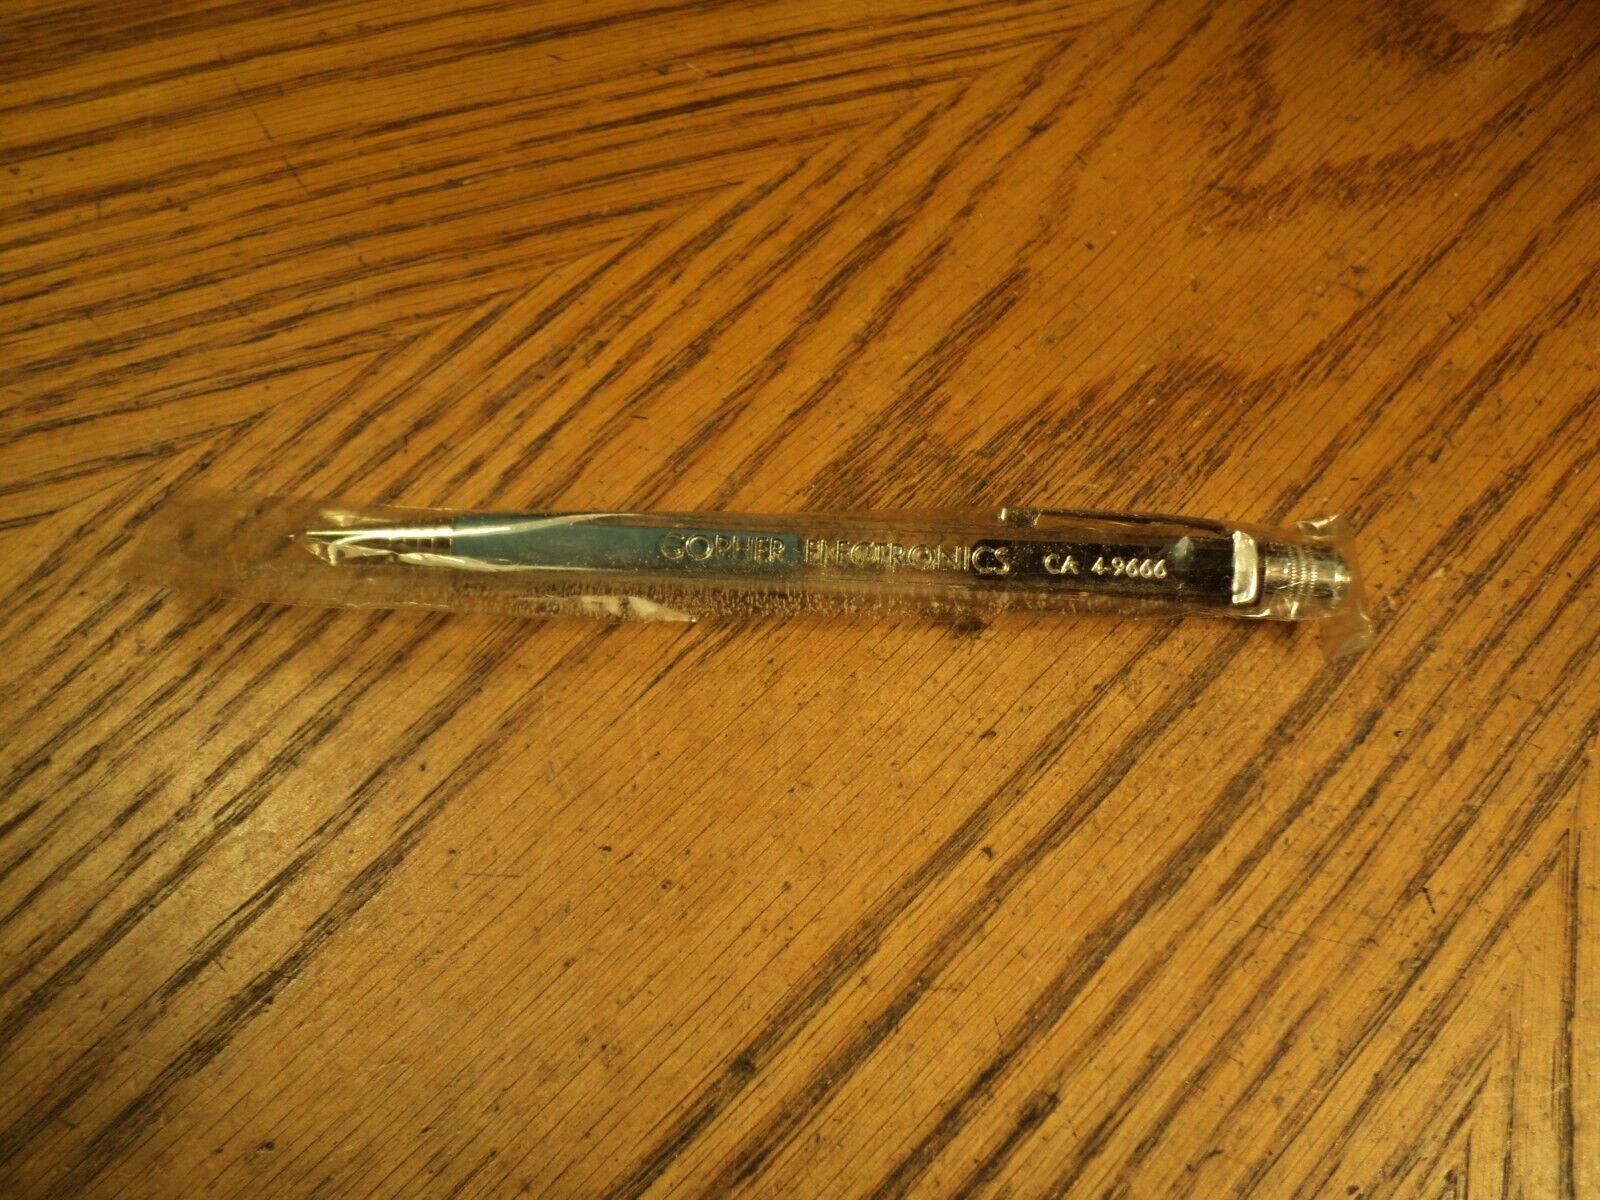 Vintage Square Shape Mechanical Pencil Advertising G. E. Semiconductor Products